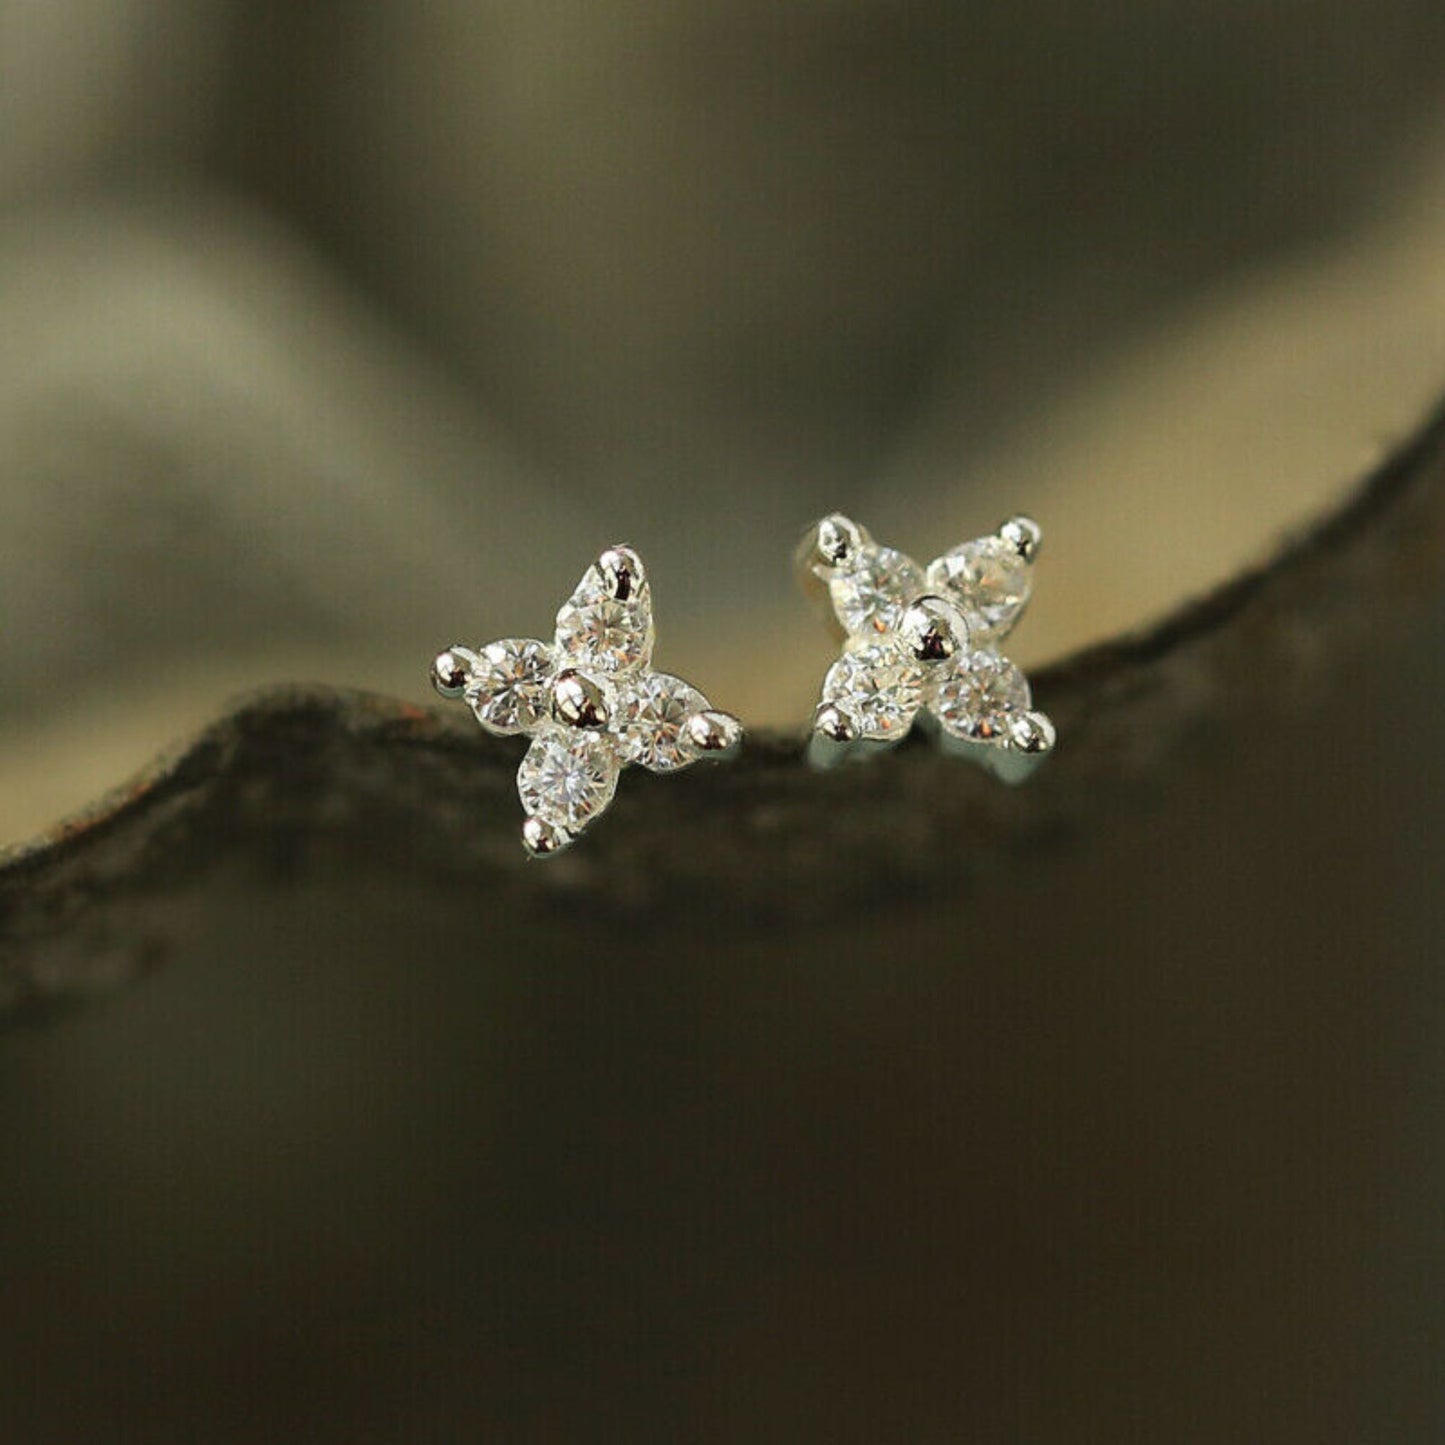 925 Sterling Silver CZ Flower Stud Earrings with Shiny Finish